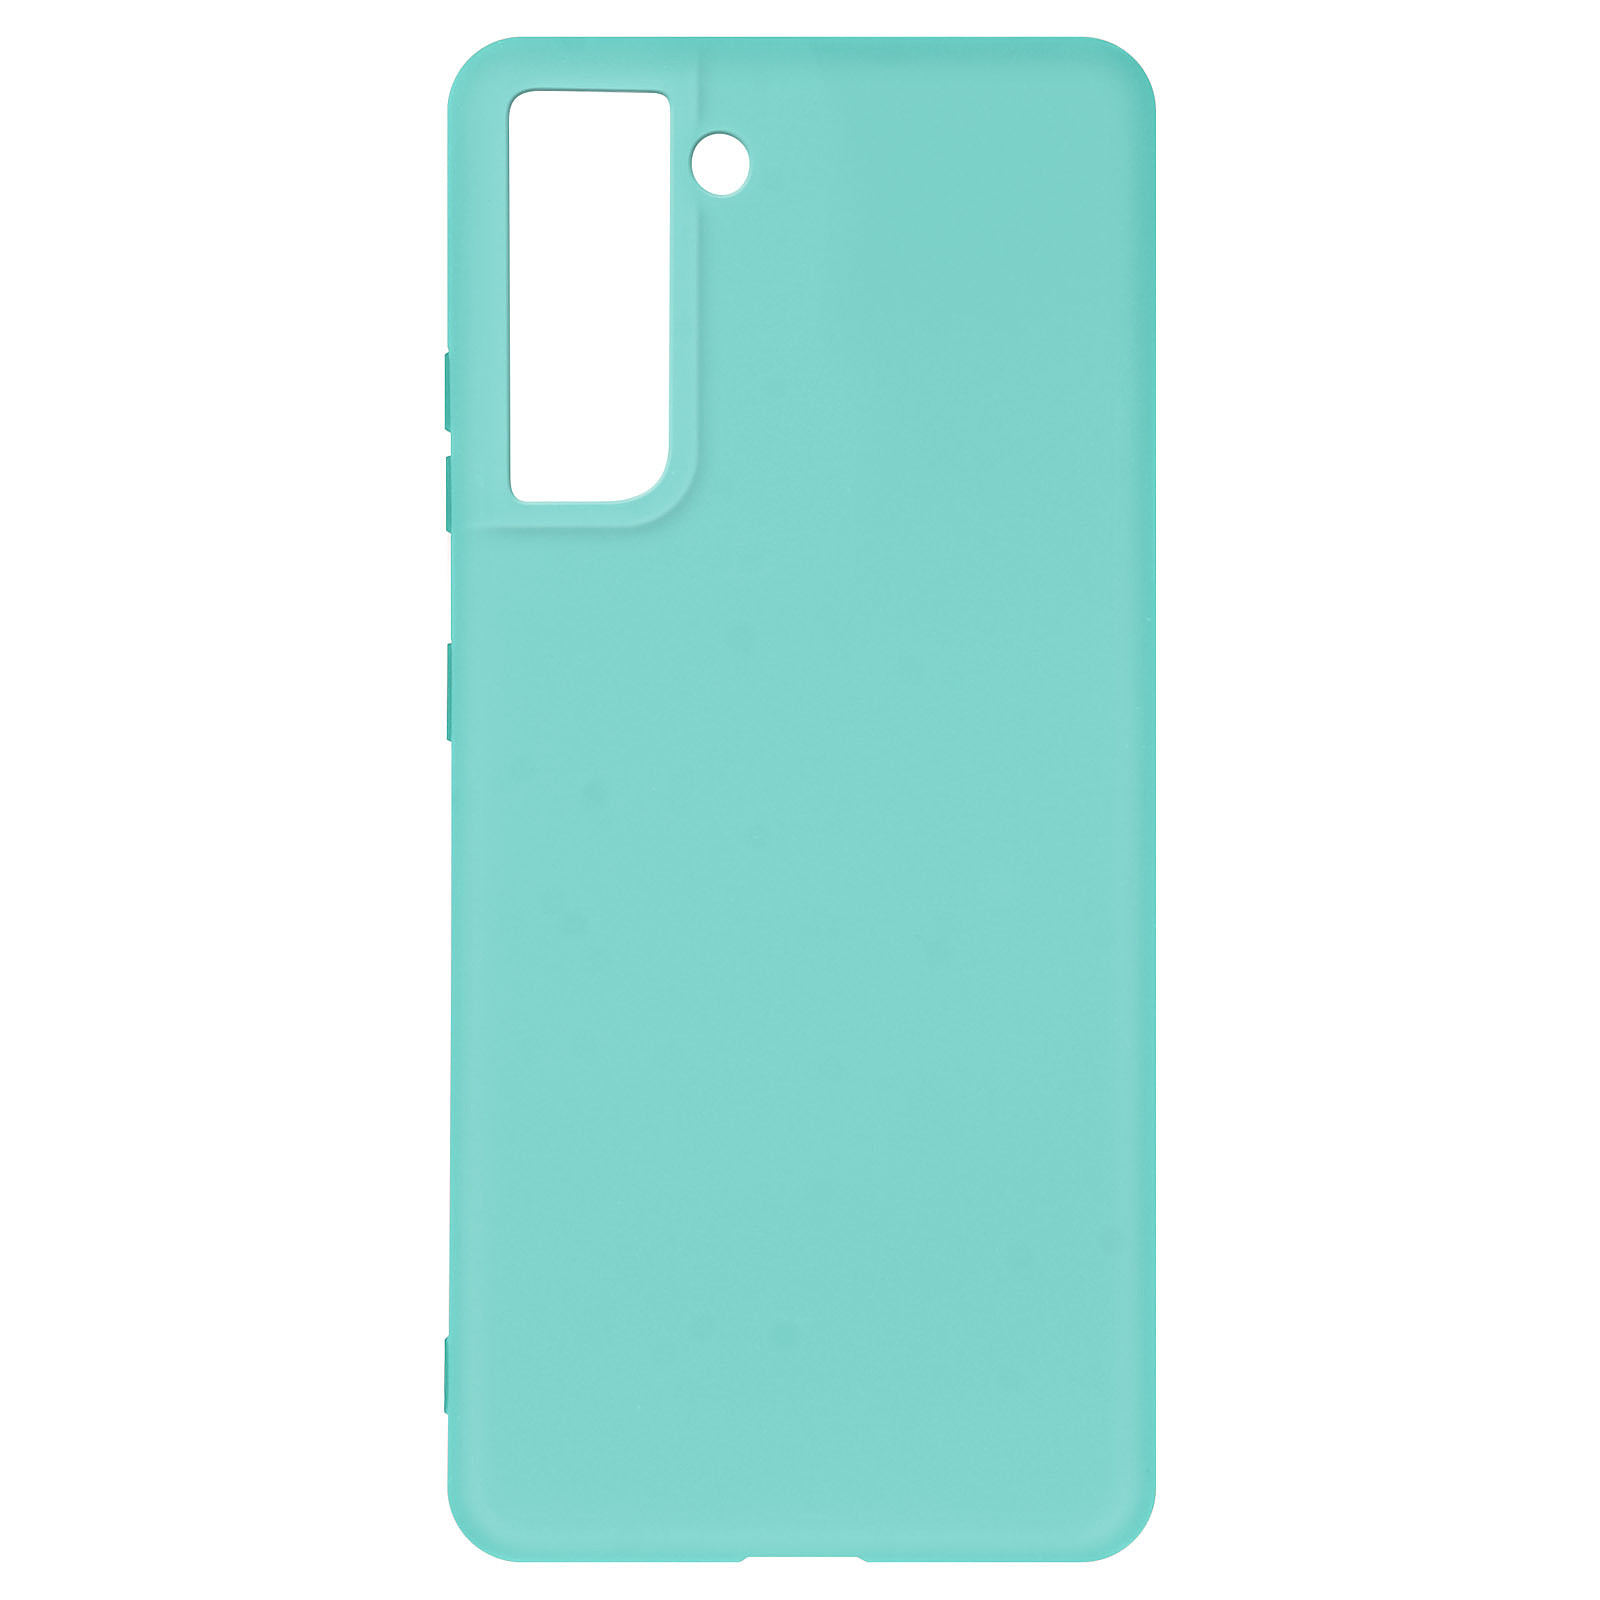 Avizar Coque pour Samsung Galaxy S21 Silicone Souple Finition Soft Touch Compatible QI Turquoise - Coque telephone Avizar